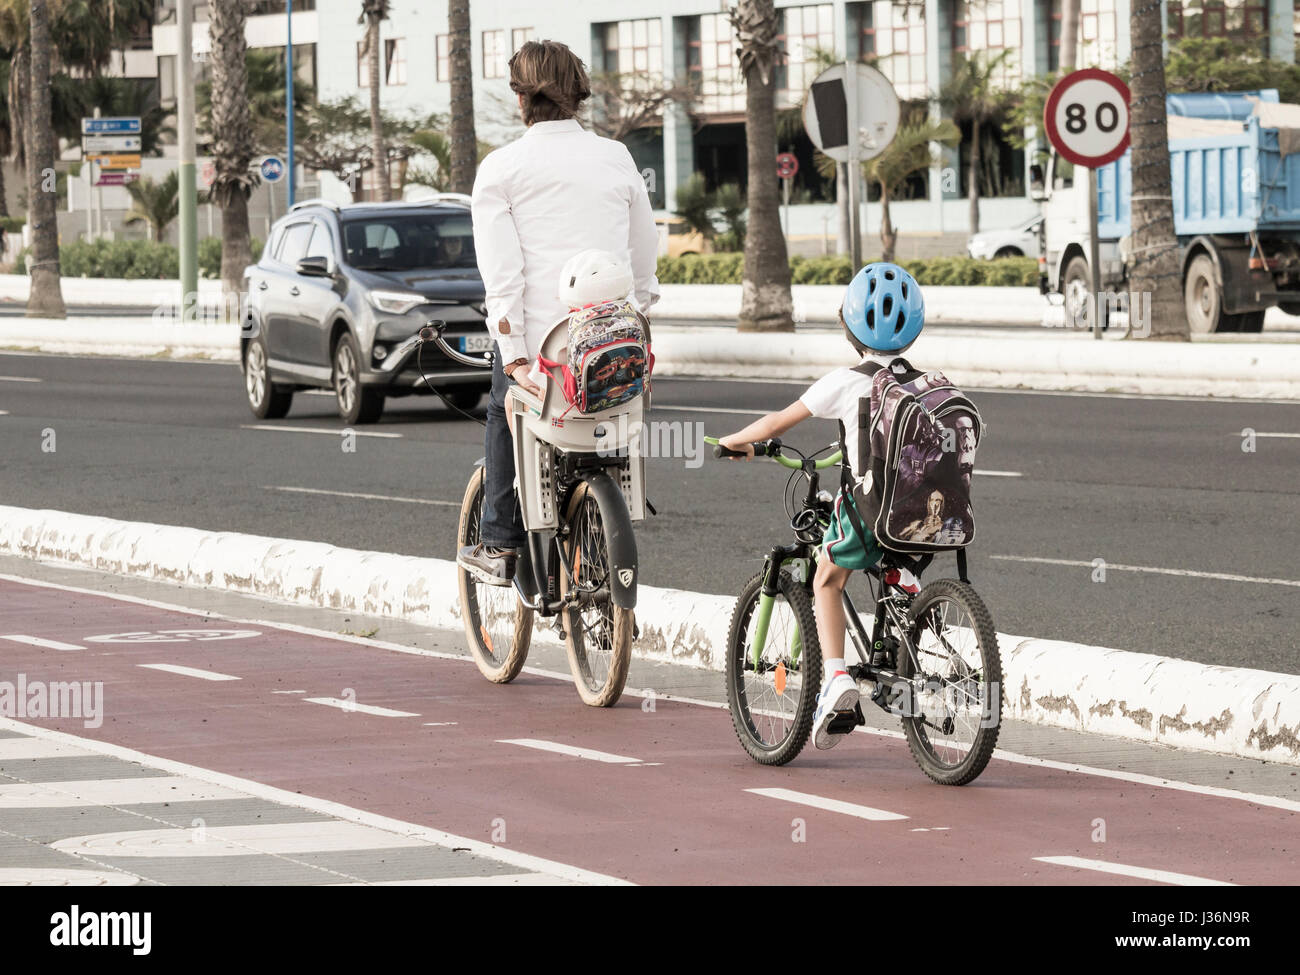 Young boy in school uniform riding to school on bicycle behind adult who is carrying small child. Stock Photo